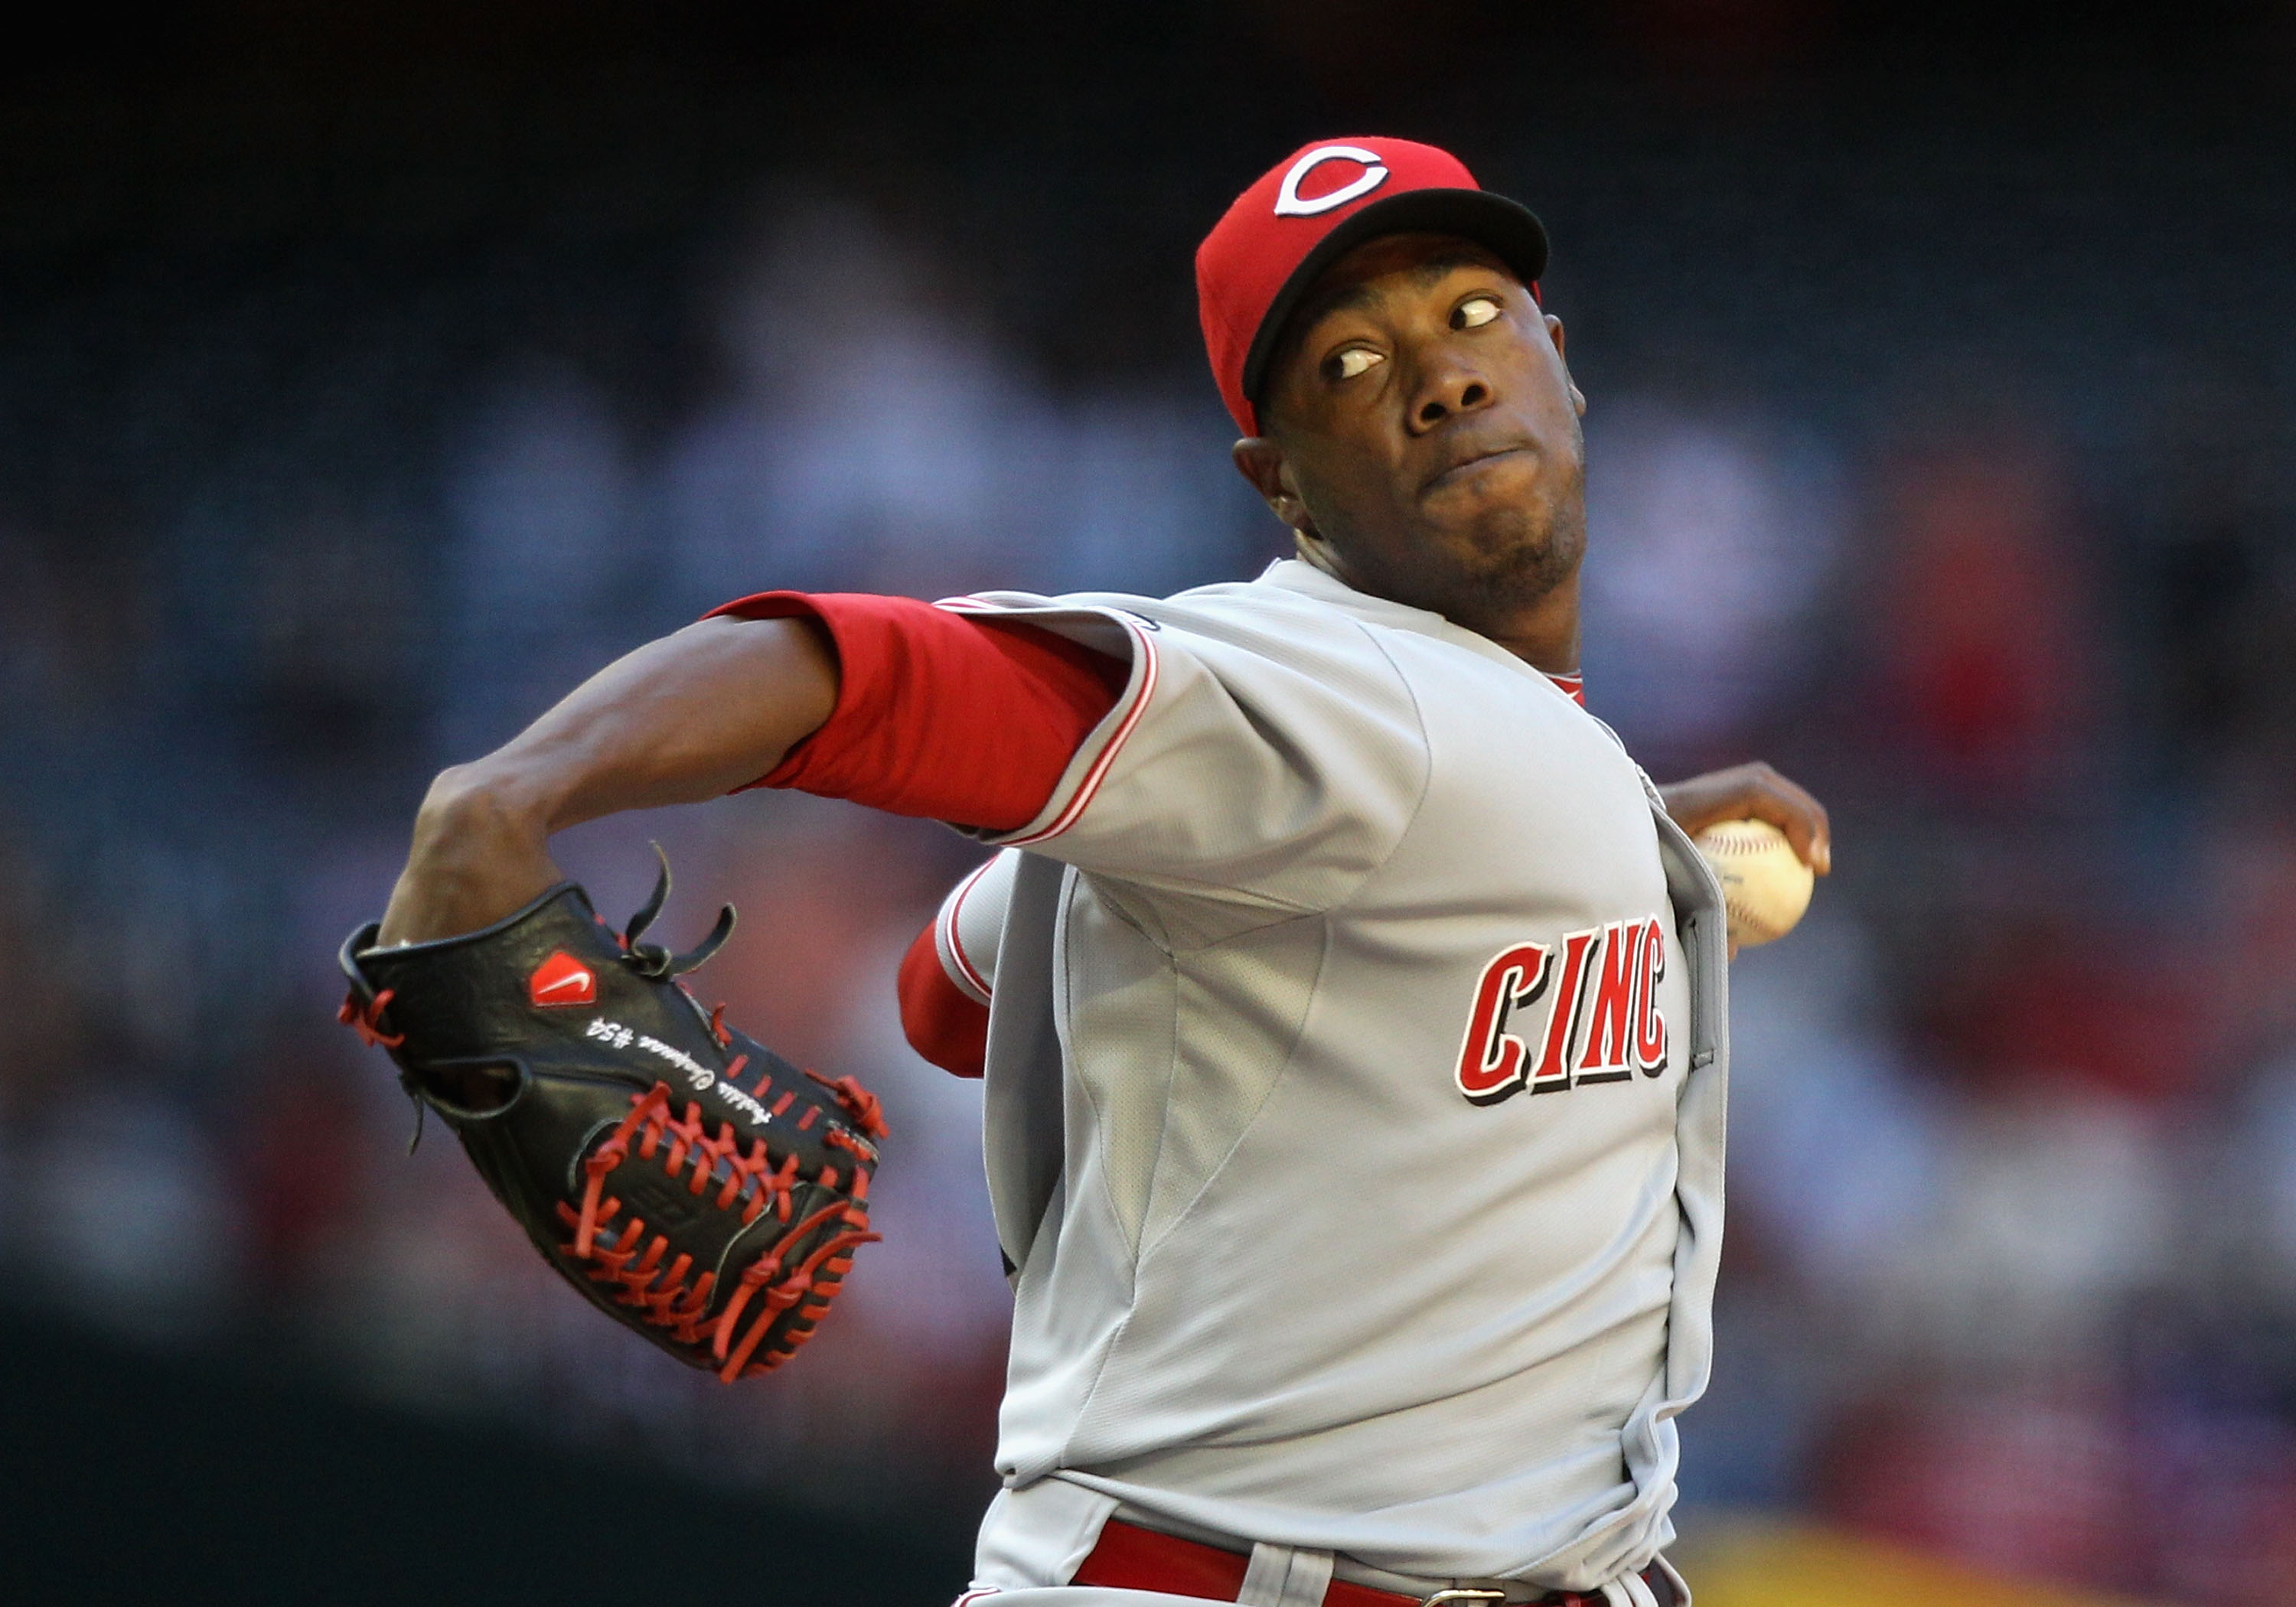 PHOENIX, AZ - APRIL 10:  Relief pitcher Aroldis Chapman #54 of the Cincinnati Reds pitches against the Arizona Diamondbacks during the Major League Baseball game at Chase Field on April 10, 2011 in Phoenix, Arizona. The Diamondbacks defeated the Reds 10-8